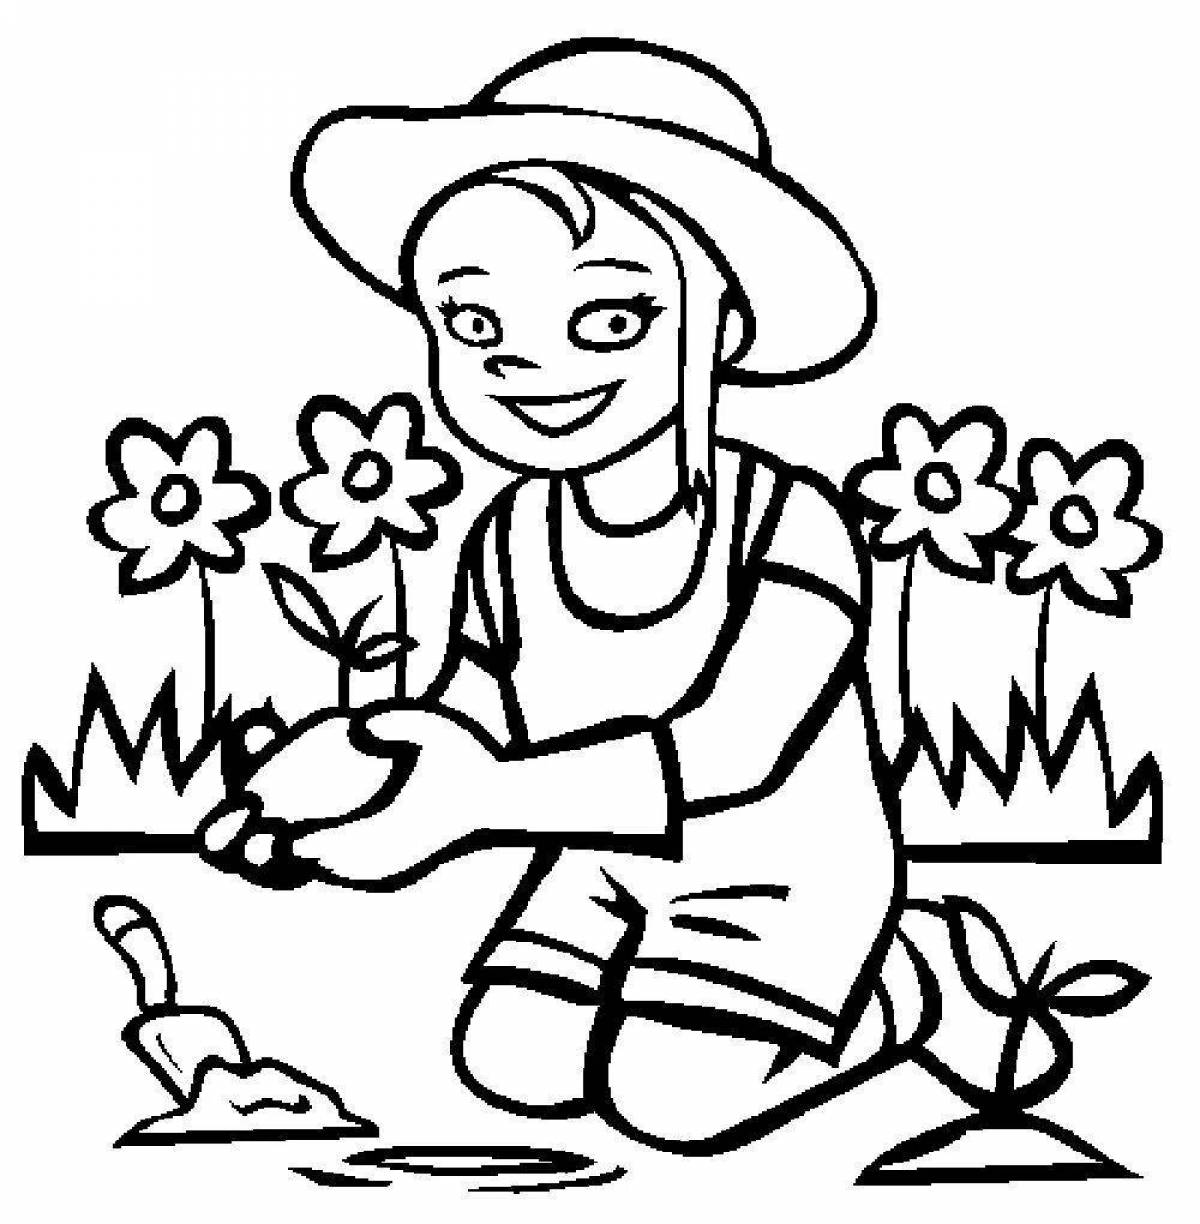 Coloring page quirky gardener